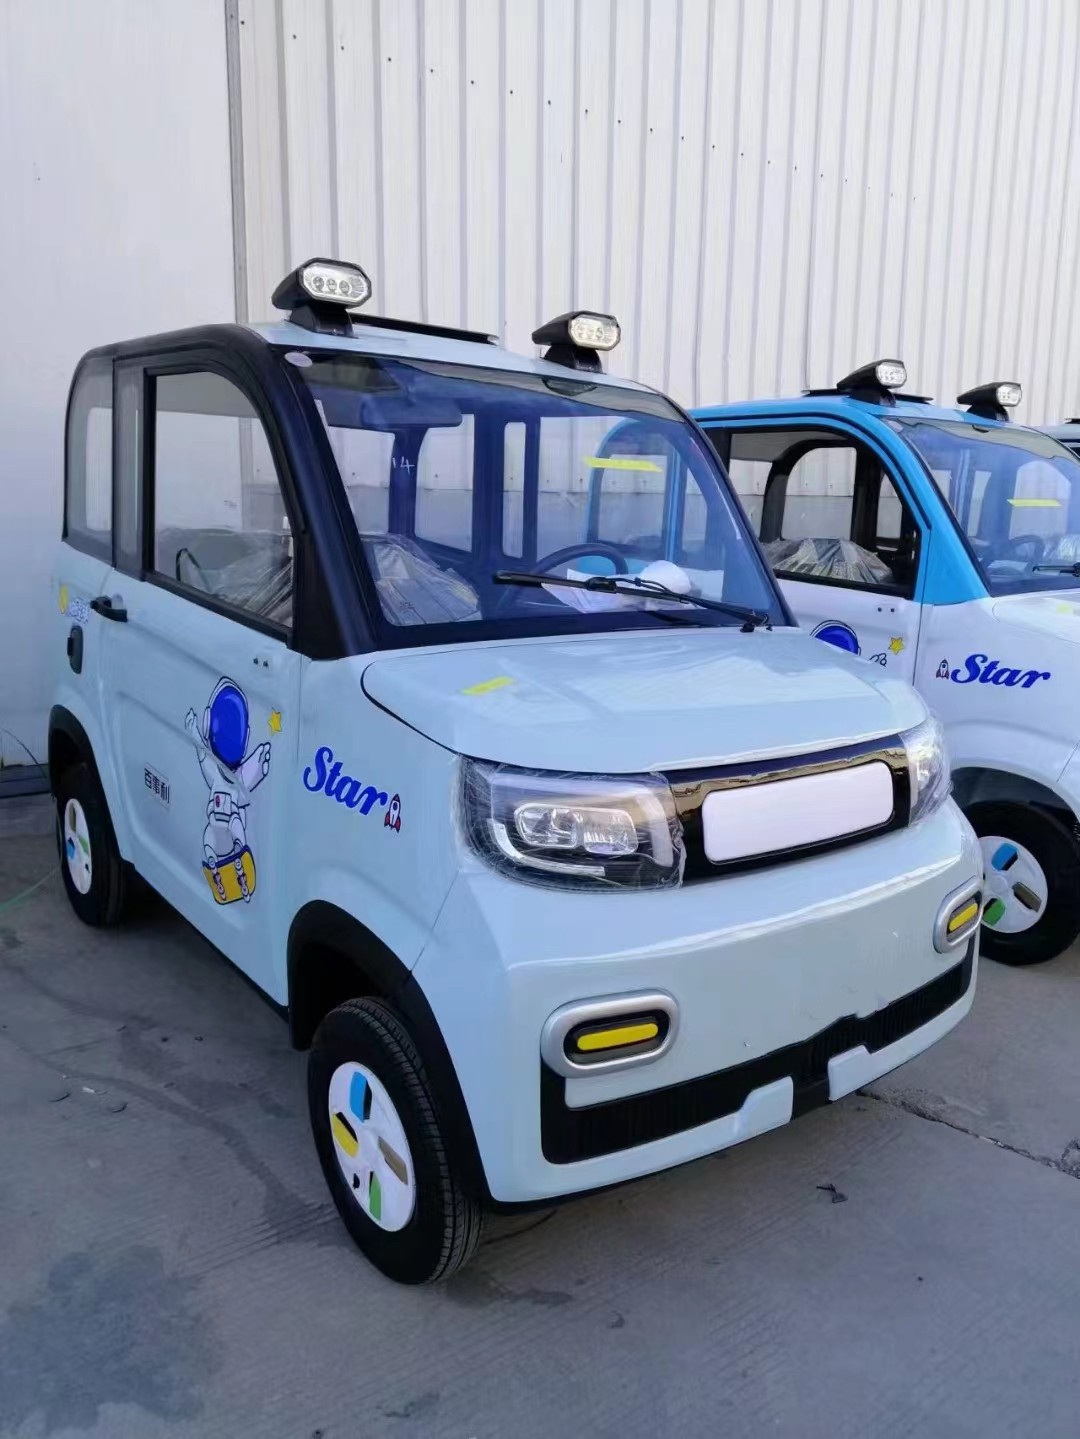 Closed two-wheel electric vehicle